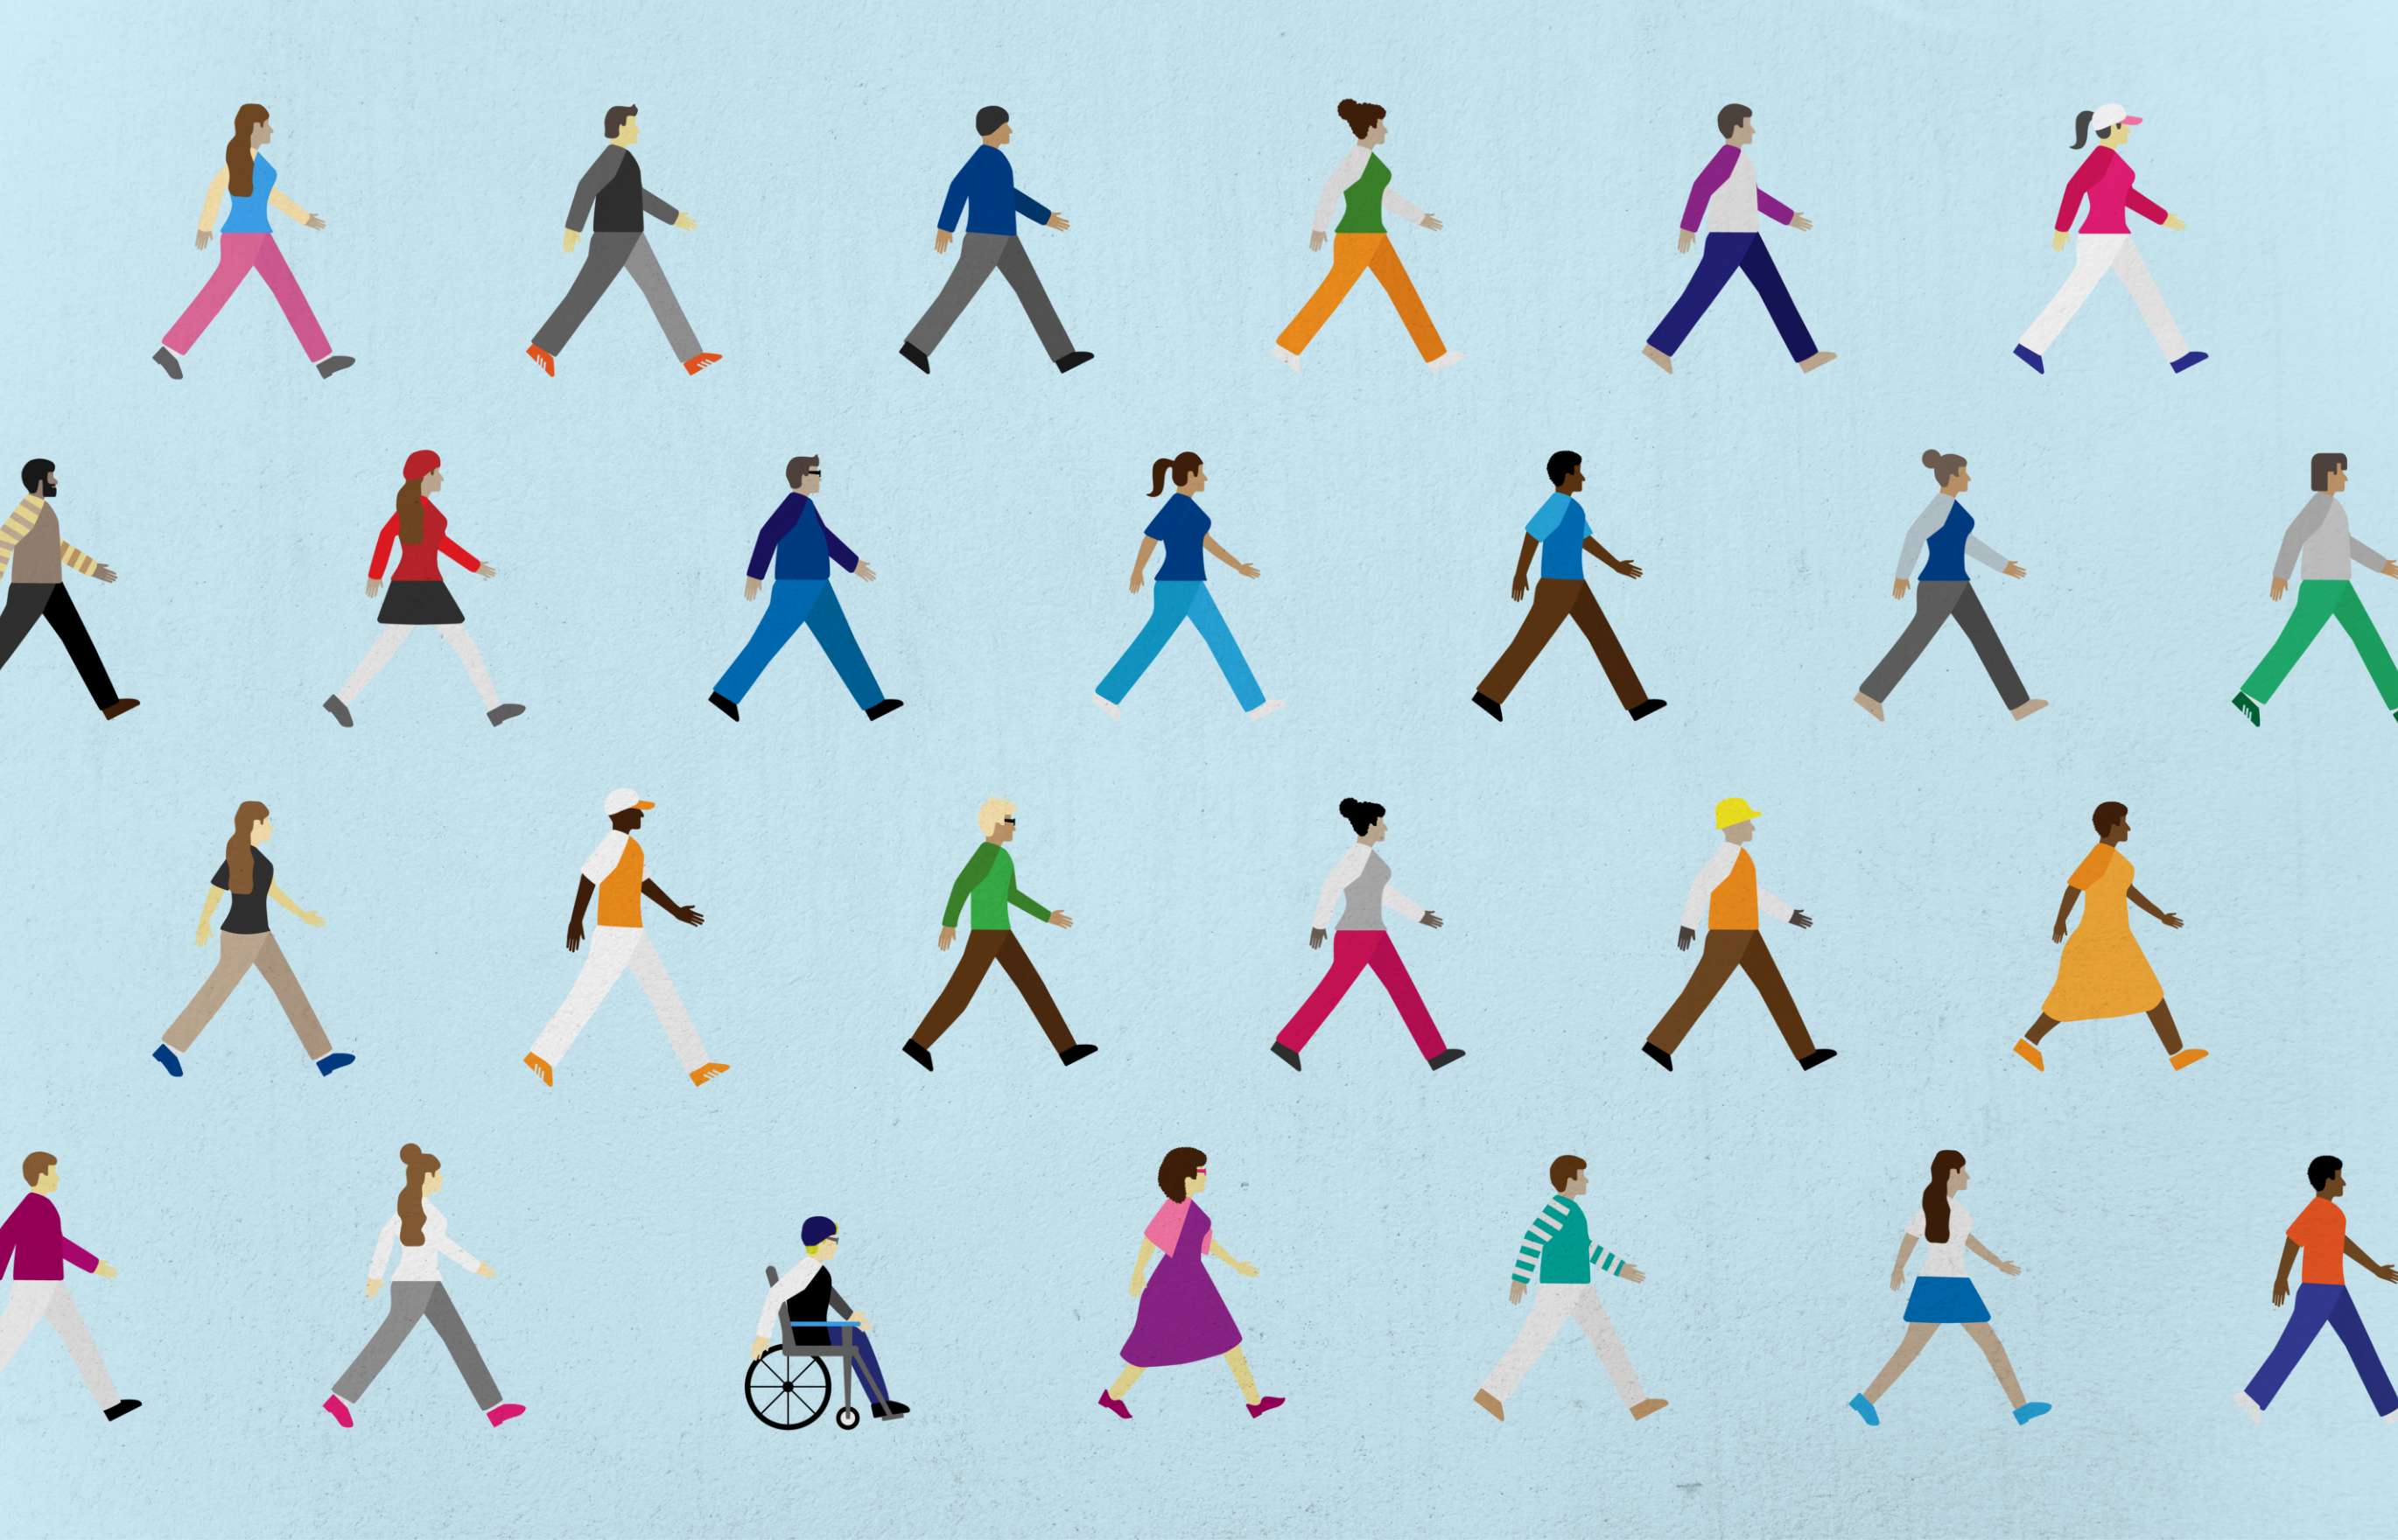 An illustration of diverse men and women in different types of dress, some walking, one in a wheelchair, moving in parallel rows toward the right.